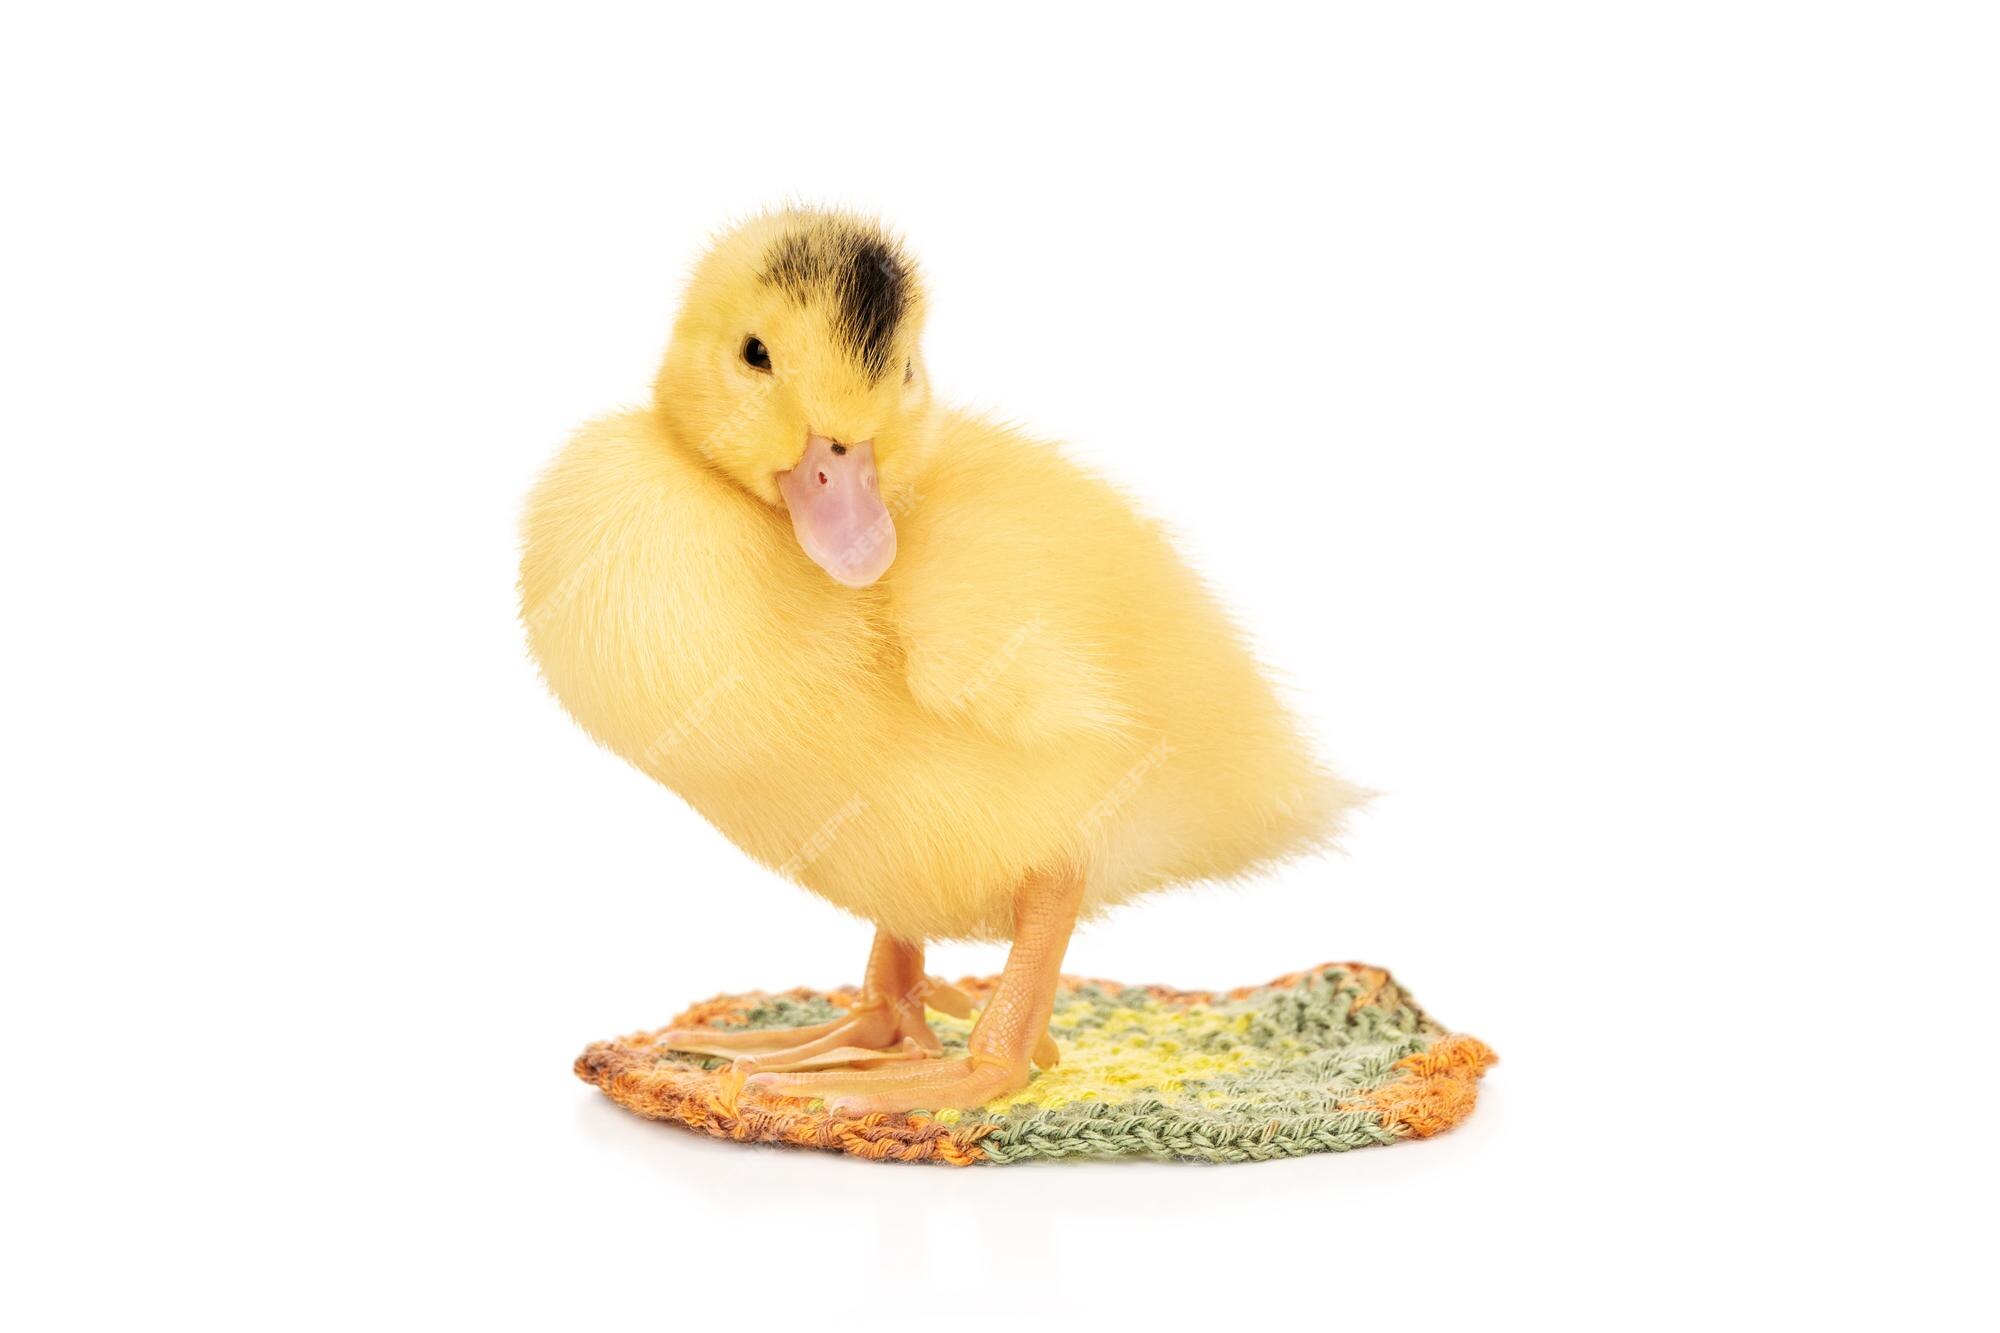 portrait-little-yellow-duckling-with-black-spot-his-head-knitted-rug-isolated-white-background_193437-1218.jpg